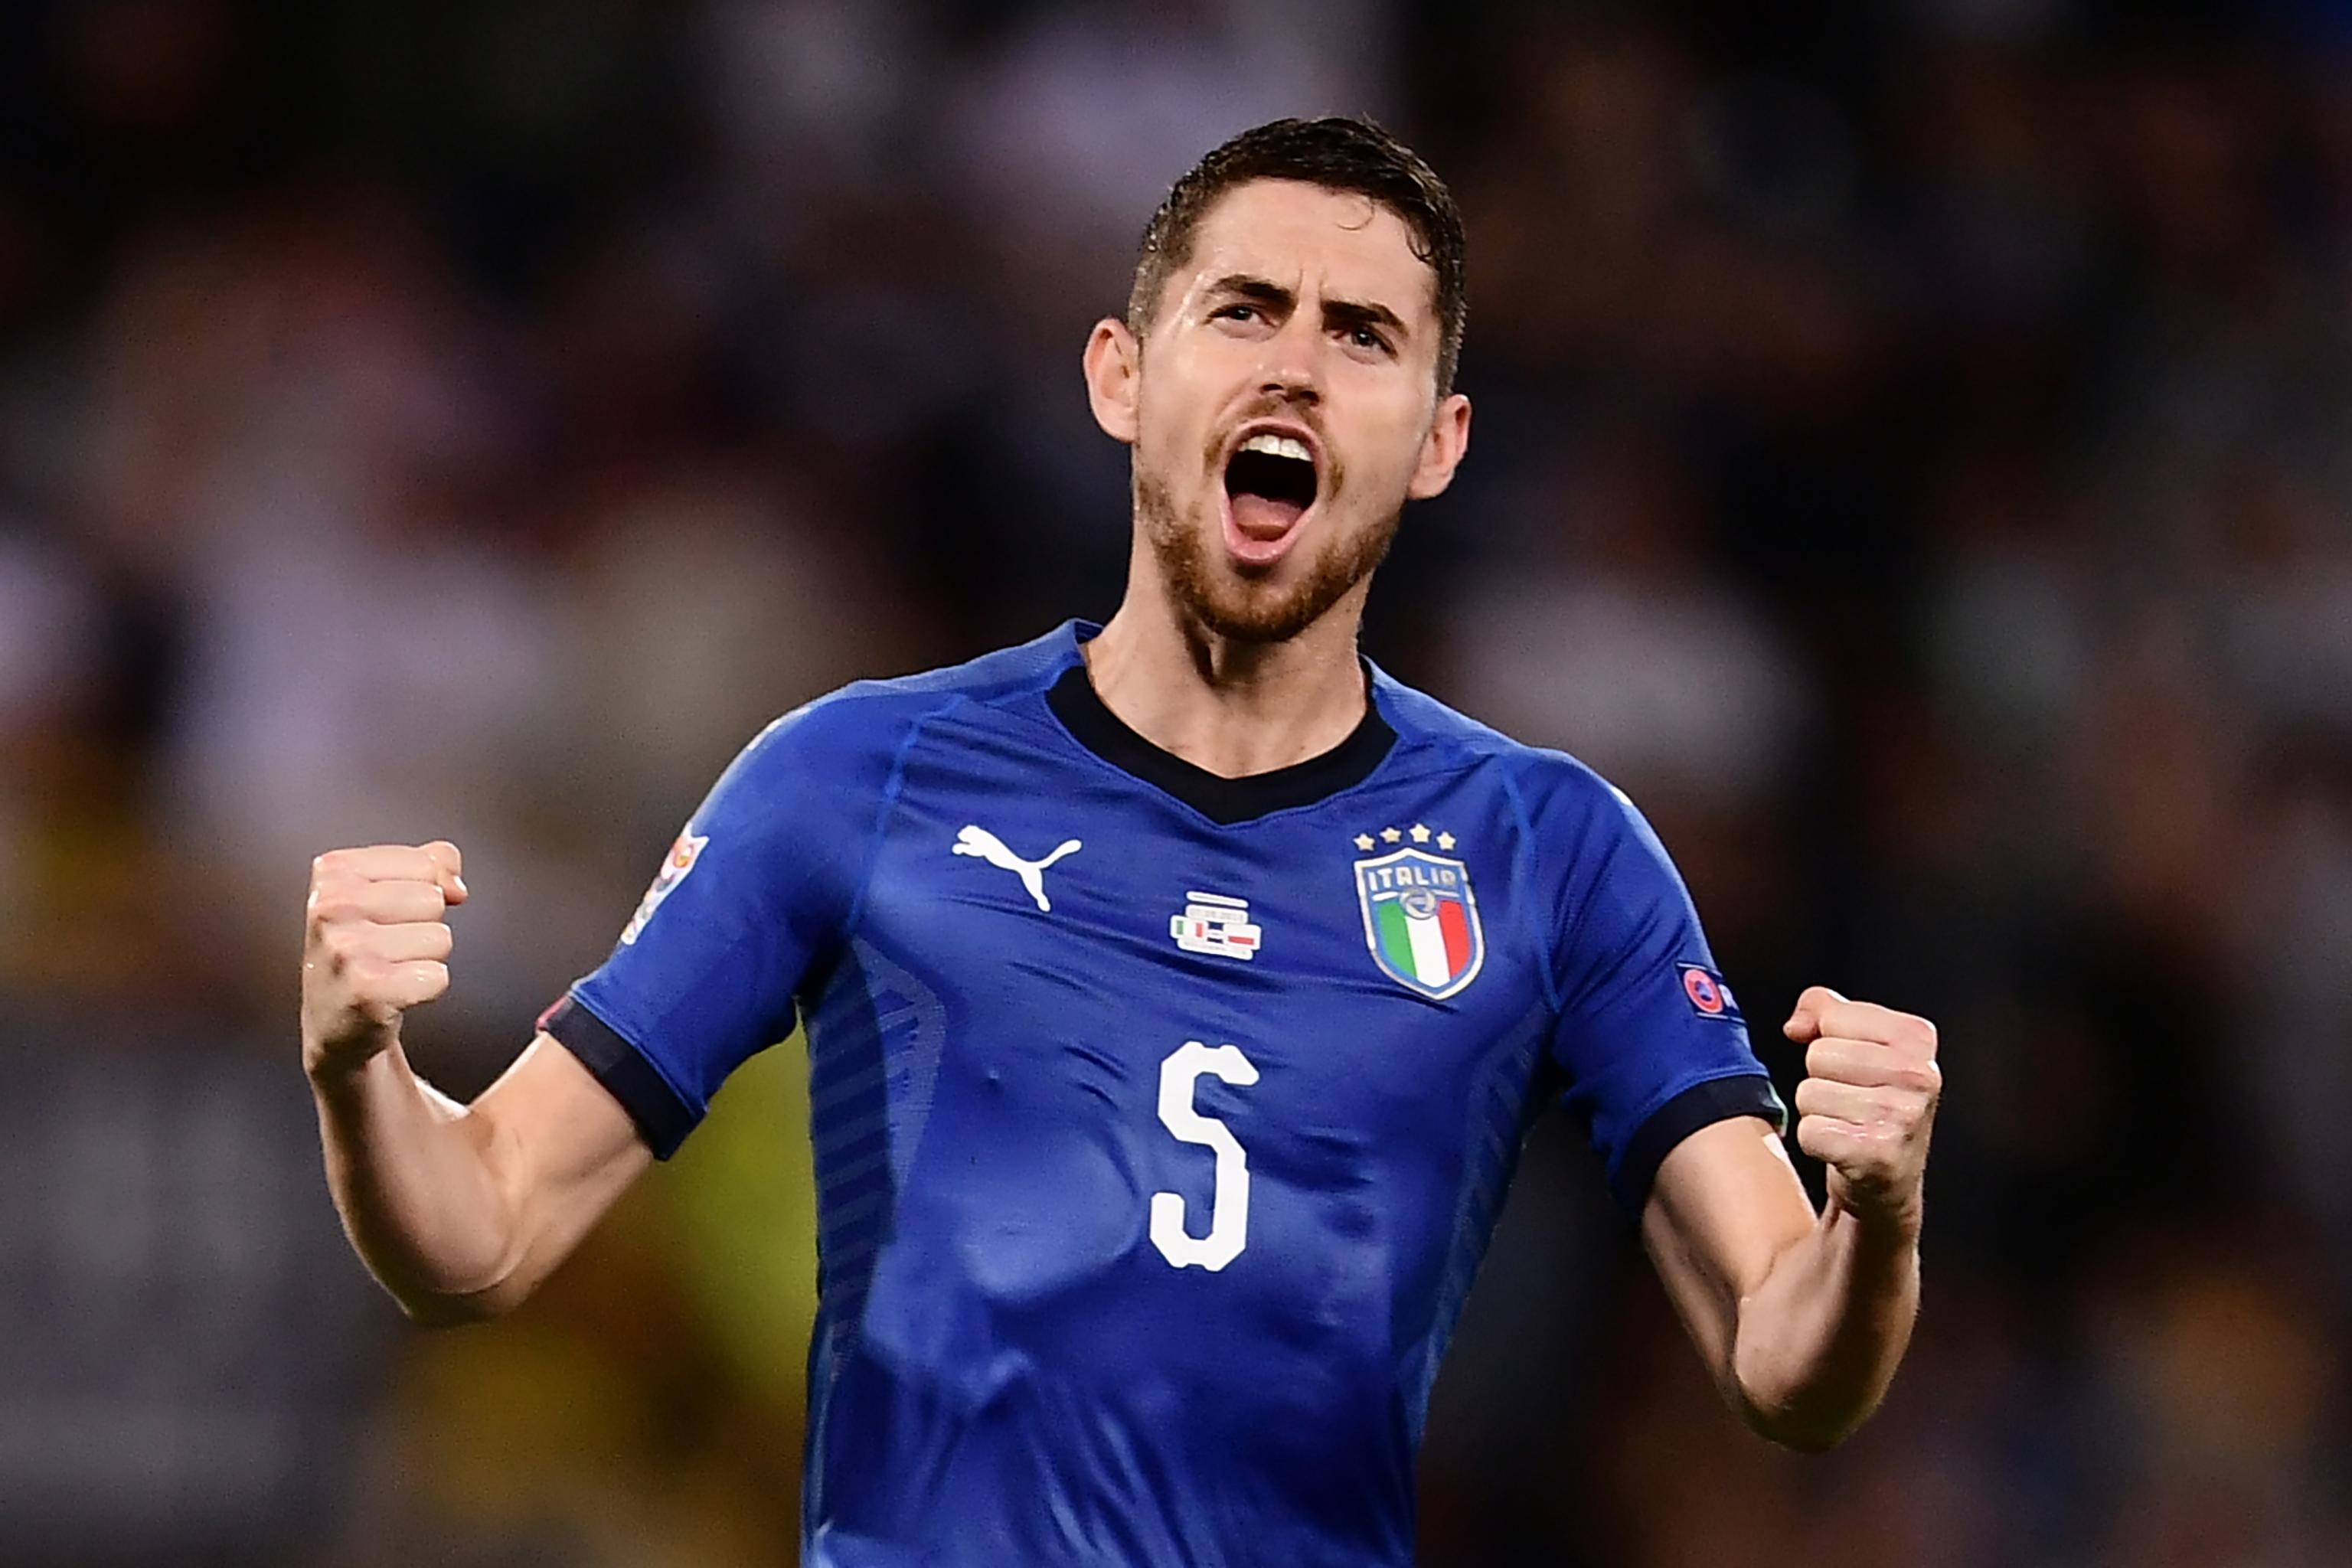 Italy Poland Ends 1 1 In 2018 Uefa Nations League After Jorginho Penalty Bleacher Report Latest News Videos And Highlights